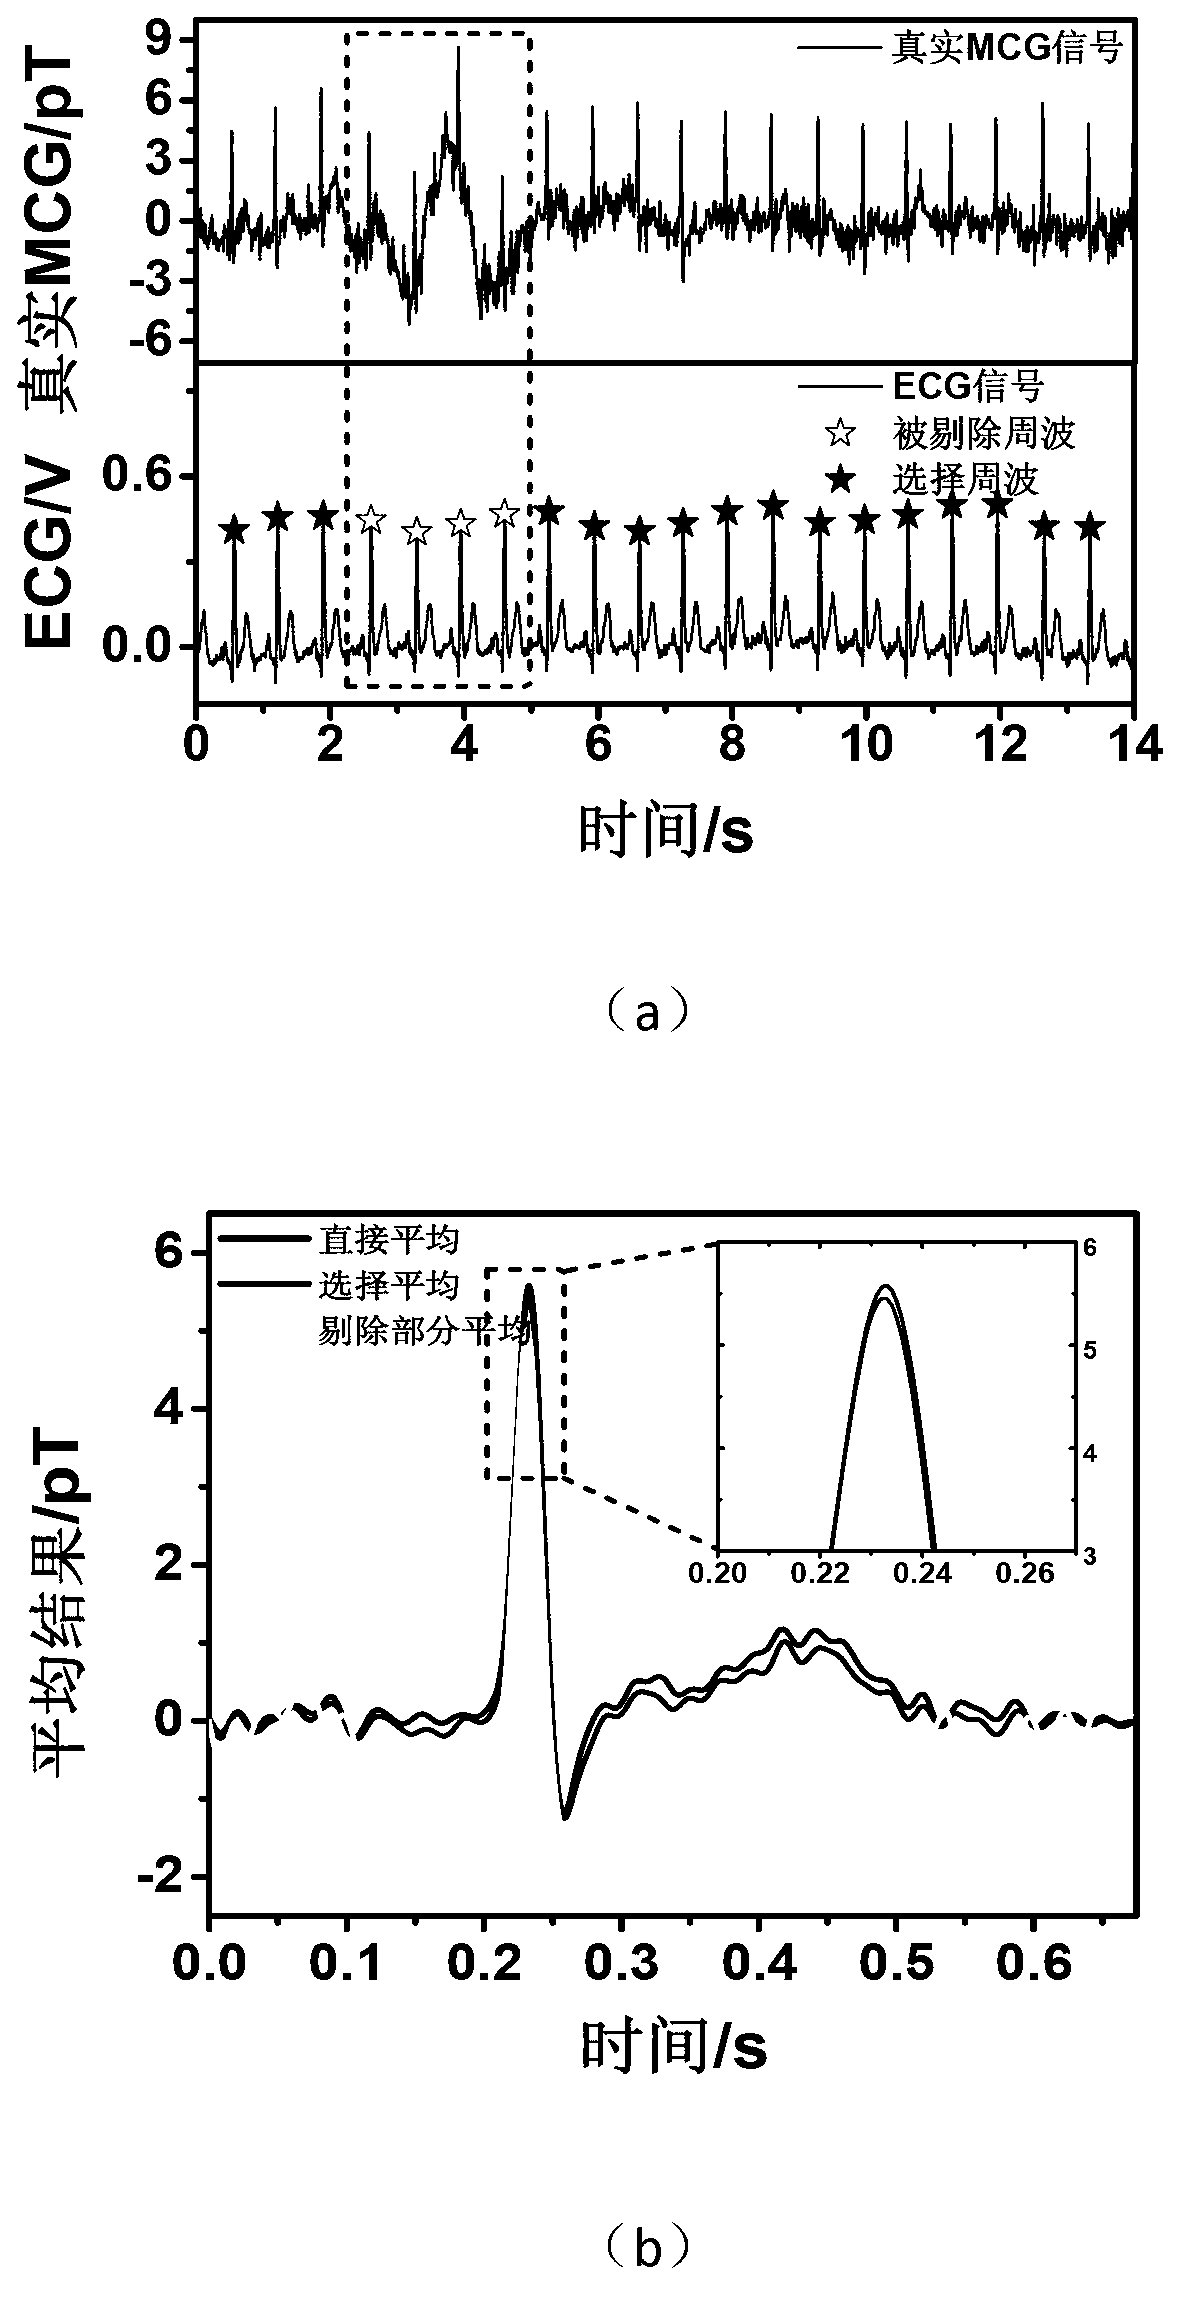 Selective cardiac-magnetic signal averaging method in signal noise suppression